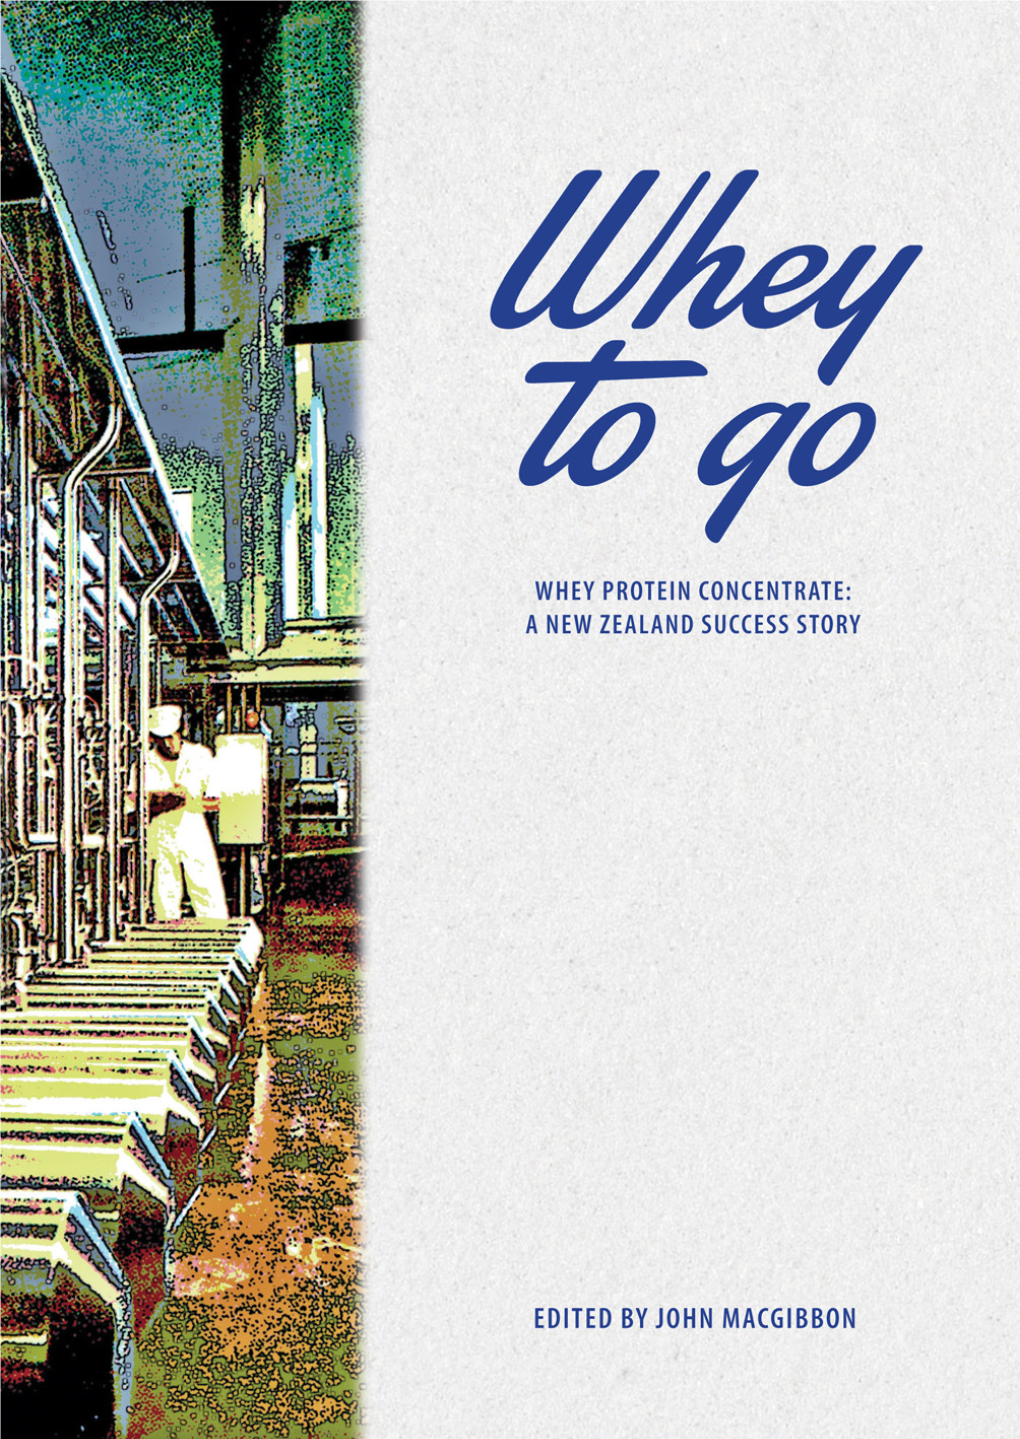 Whey Protein Concentrate: a New Zealand Success Story